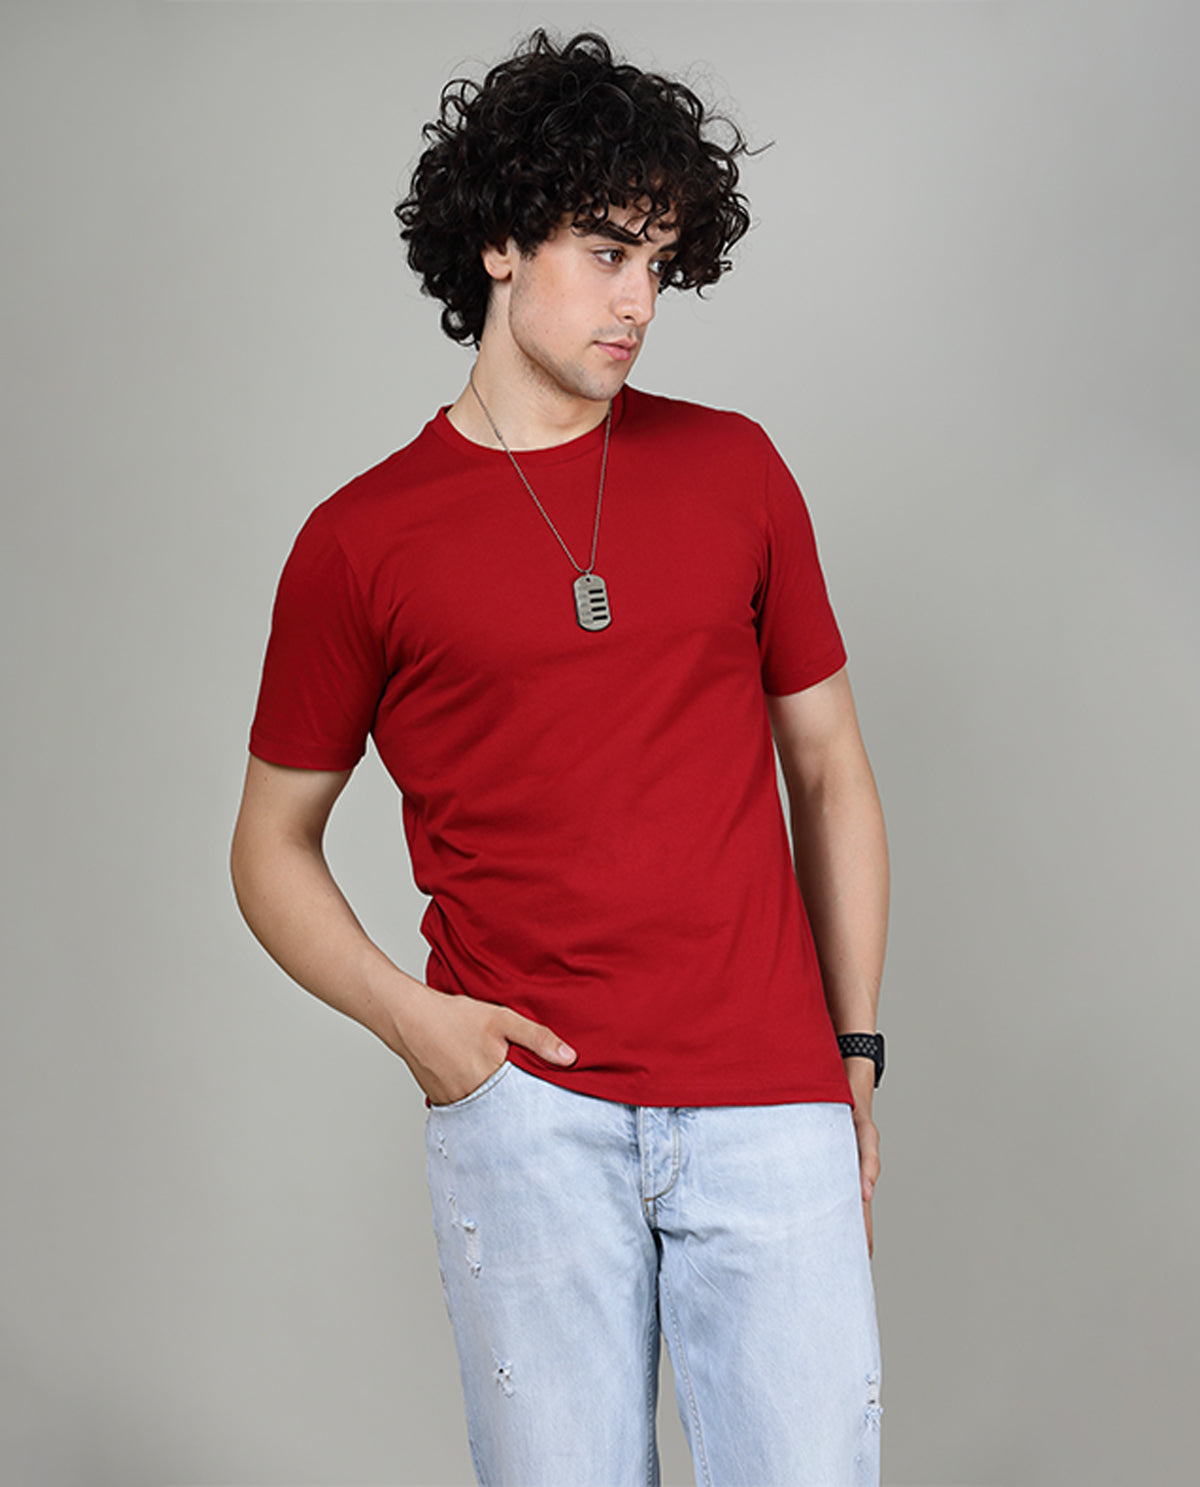 Knockout Red - Mens Half sleeves T- Shirt - T-SHIRT LOVER